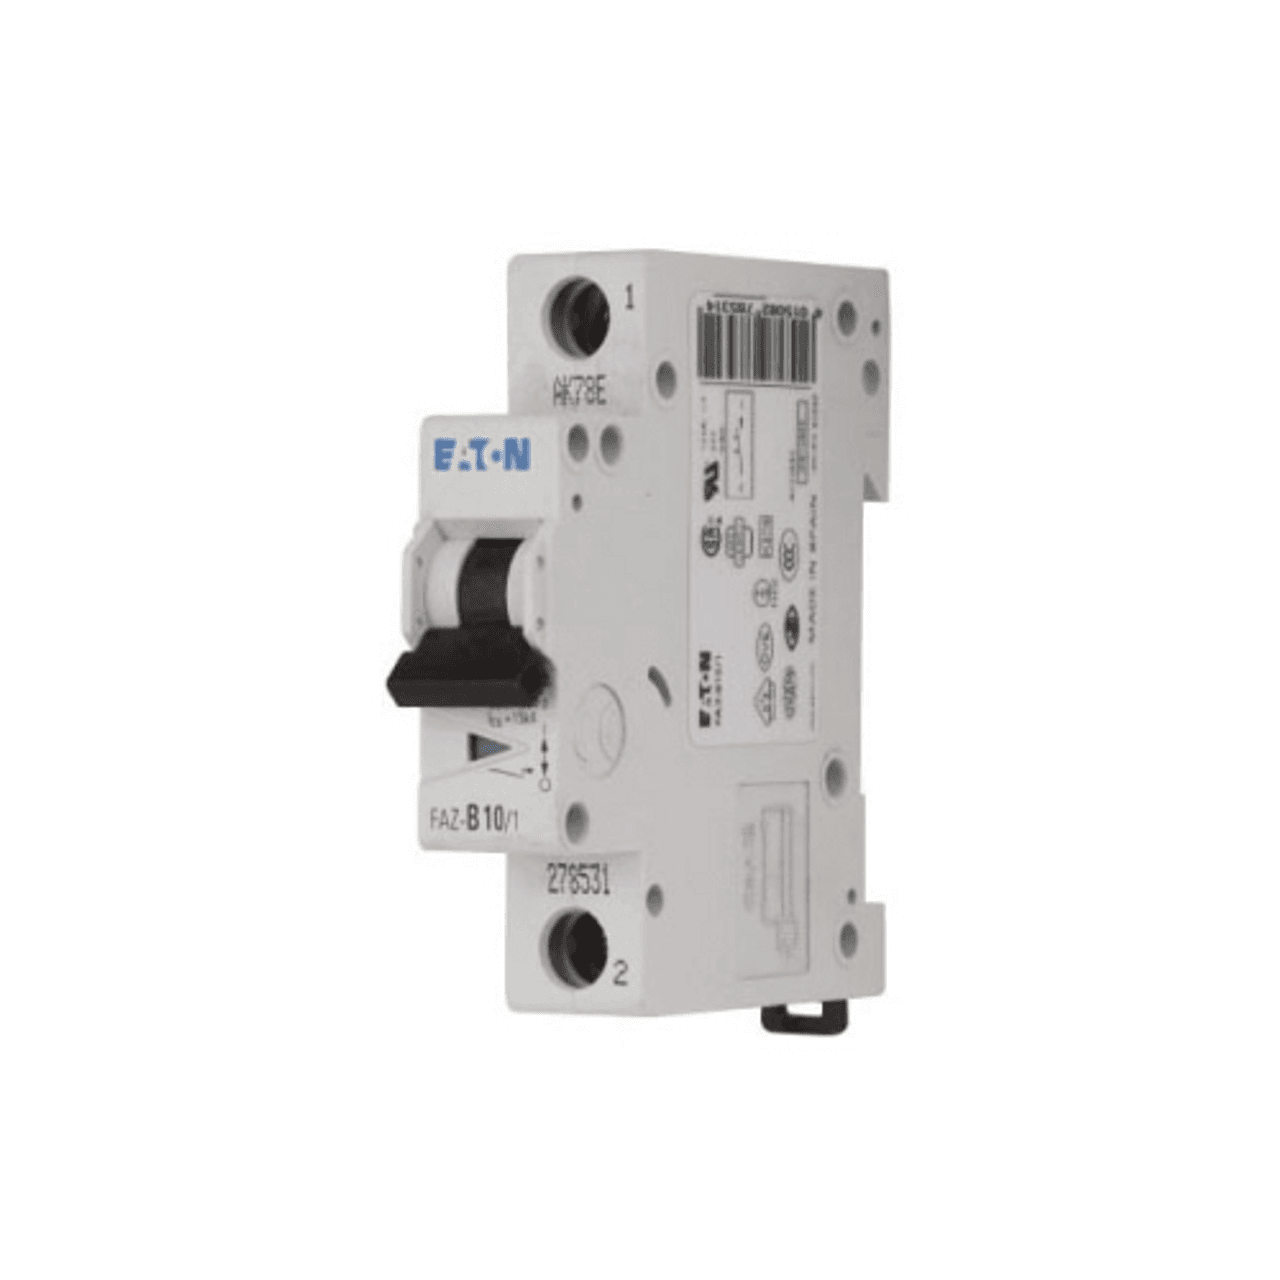 Eaton FAZ-C2/1-SP Eaton FAZ supplementary protector,UL 1077 Industrial miniature circuit breaker-supplementary protector,Single package,Medium levels of inrush current are expected,2 A,15 kAIC,Single-pole,277 V,5-10X/n,Q38,50-60 Hz,Standard terminals,C Curve